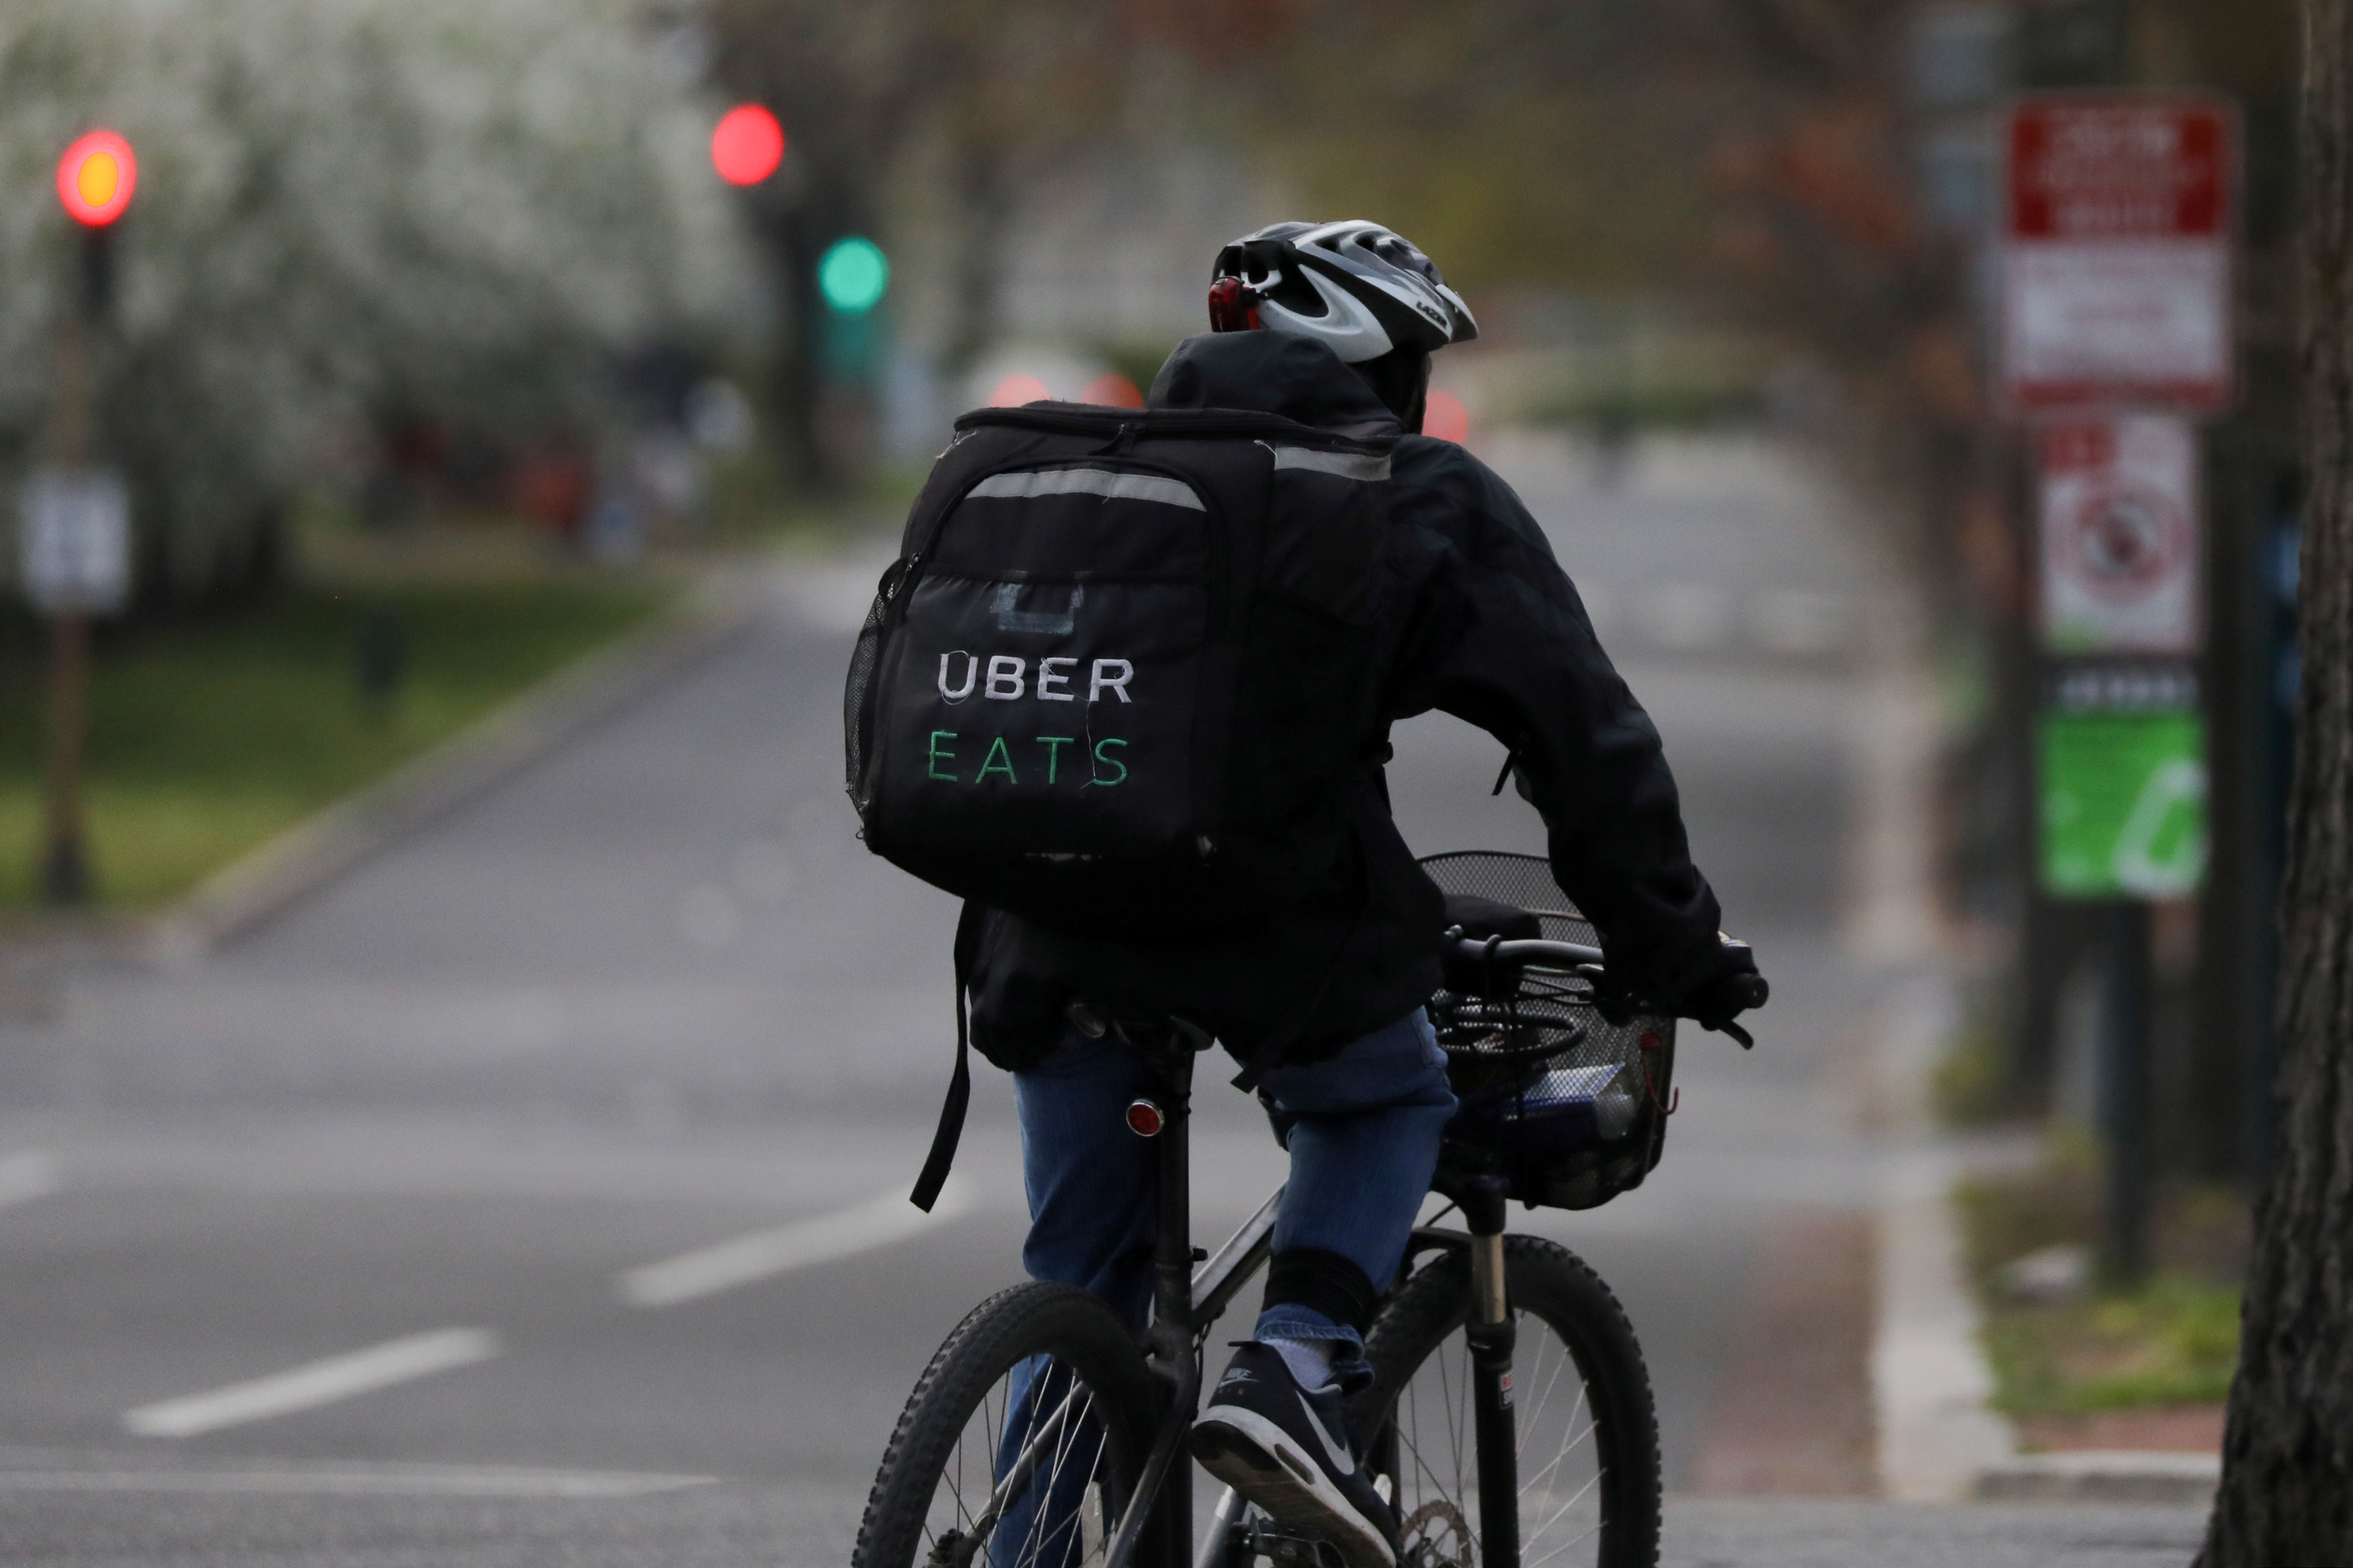 An Uber Eats bicyclist makes a delivery during the coronavirus outbreak, in the U.S. Capitol Hill neighborhood in Washington